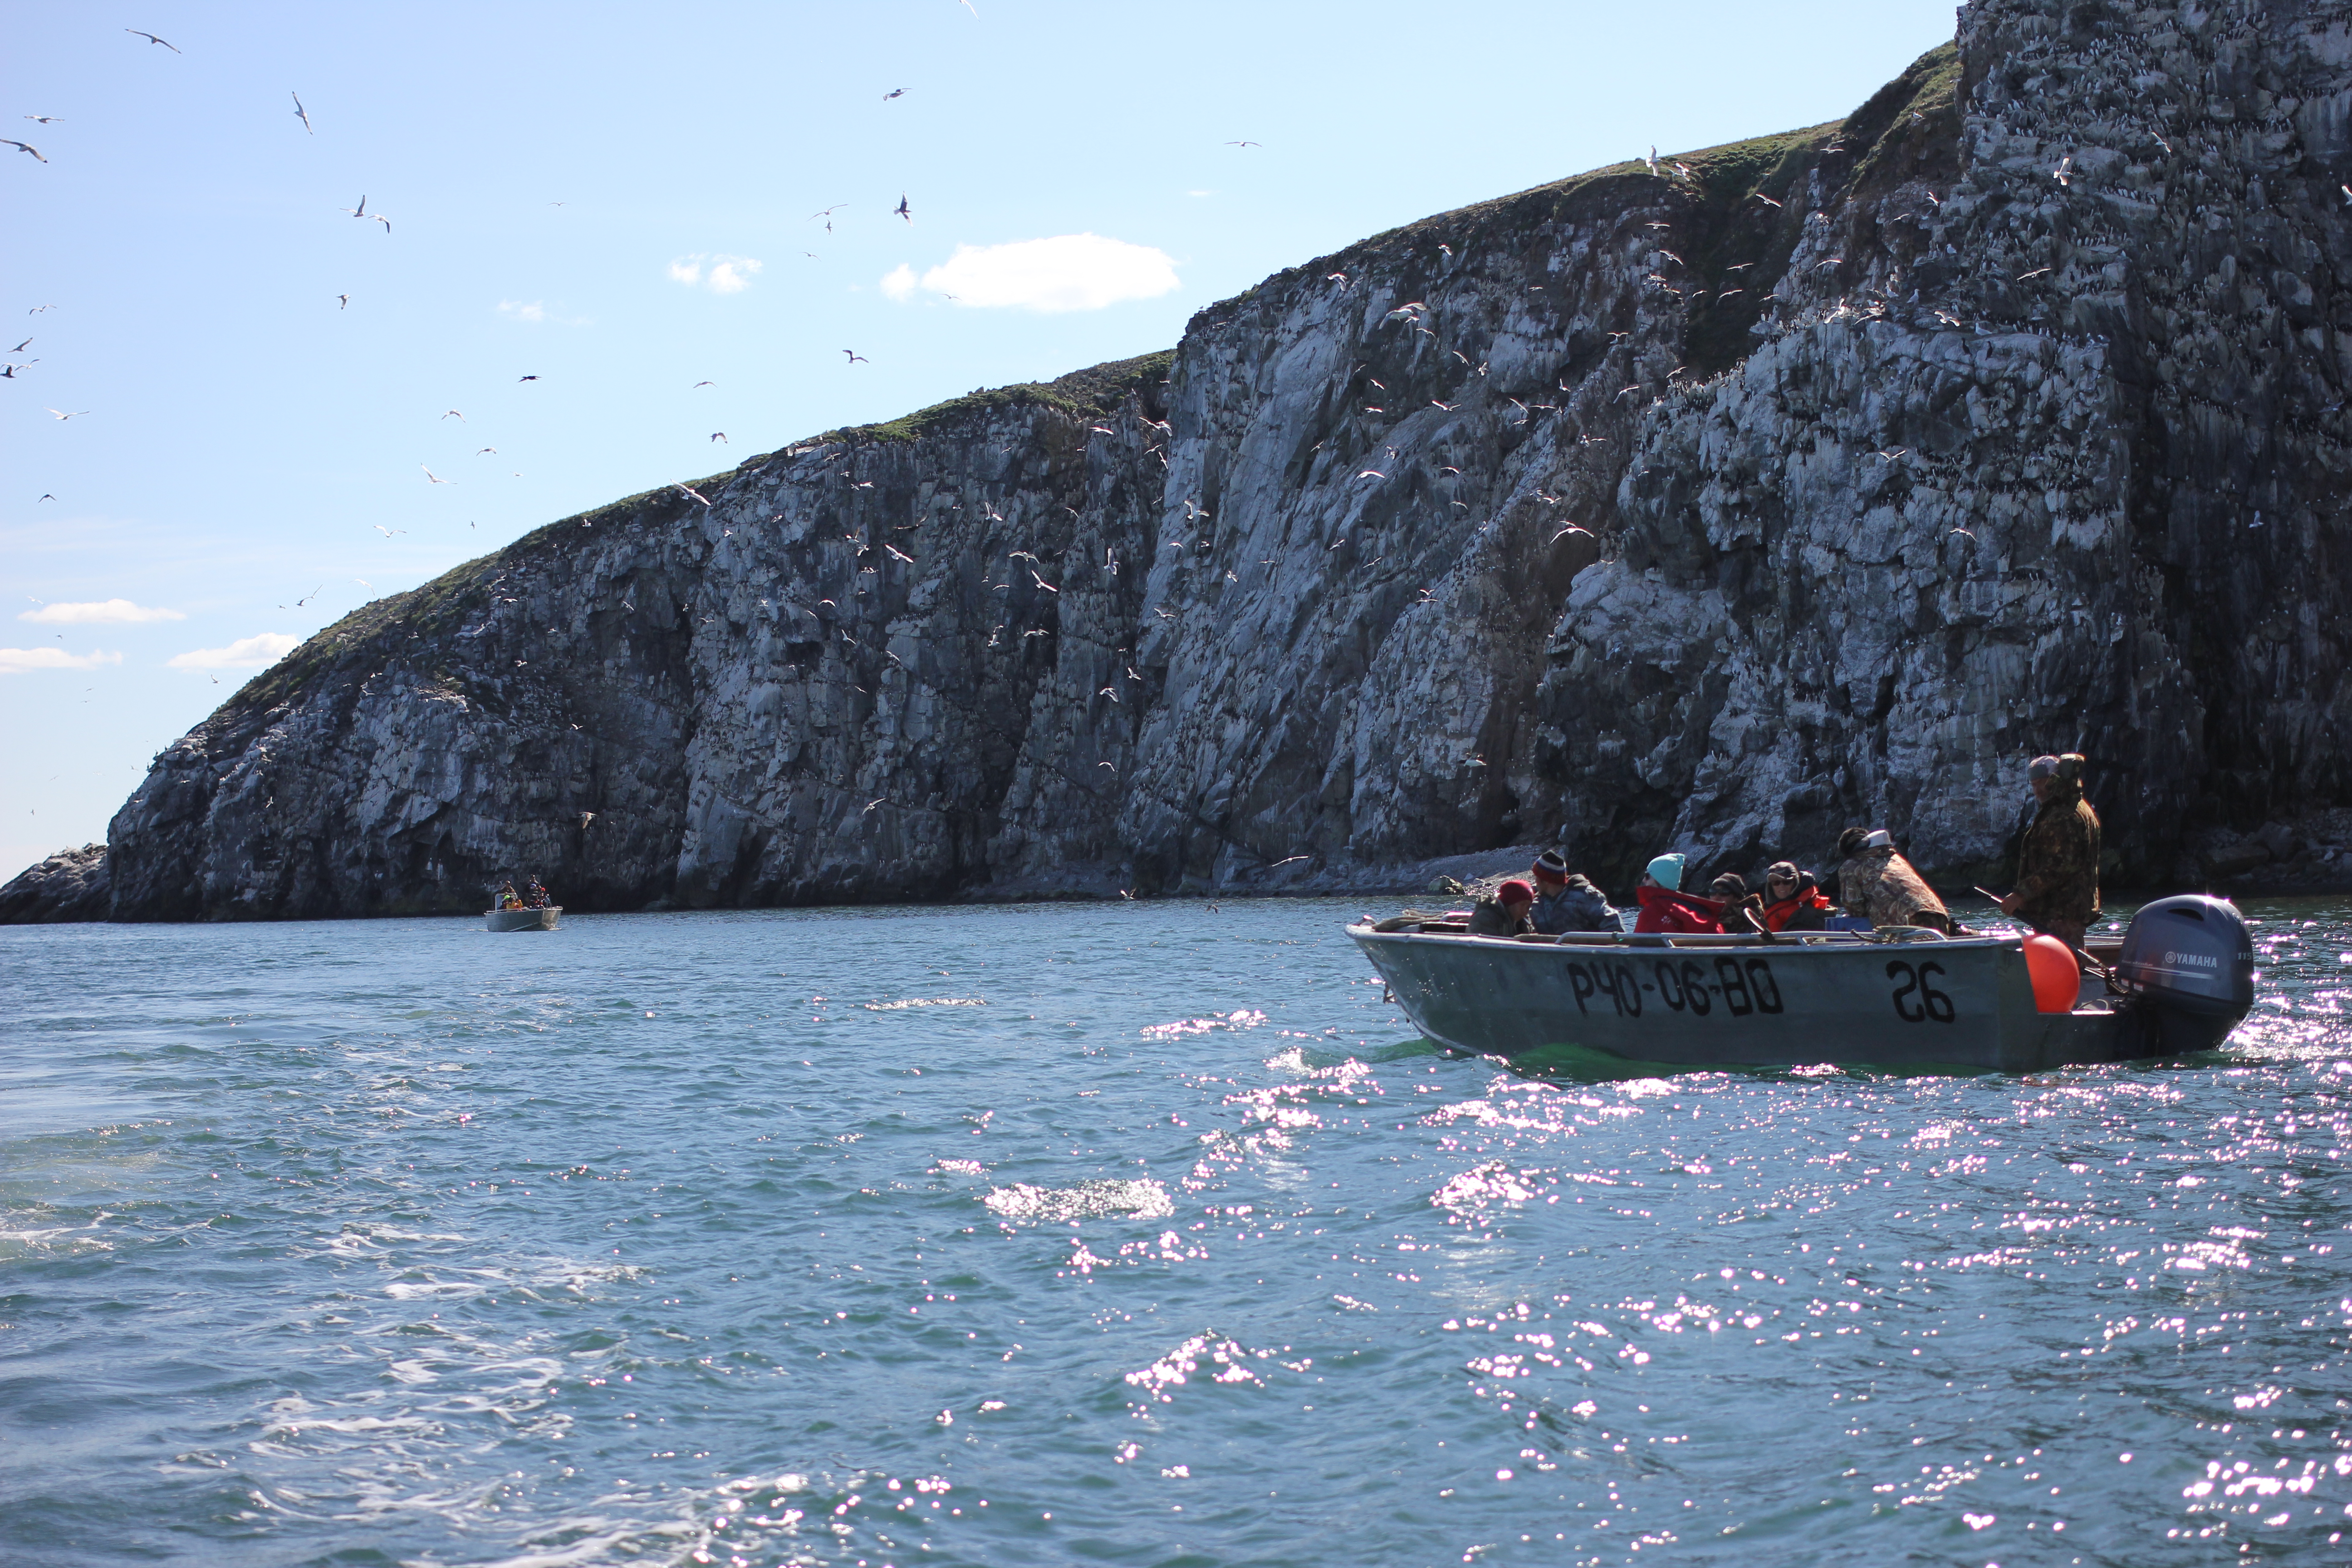 Members of the Diomede Island Family Reunion expedition pass a bird rookery along the coast of Chukotka in early July 2016. The region, rich in flora and fauna, is rarely visited. (Kirsten Swann / Alaska Dispatch News)